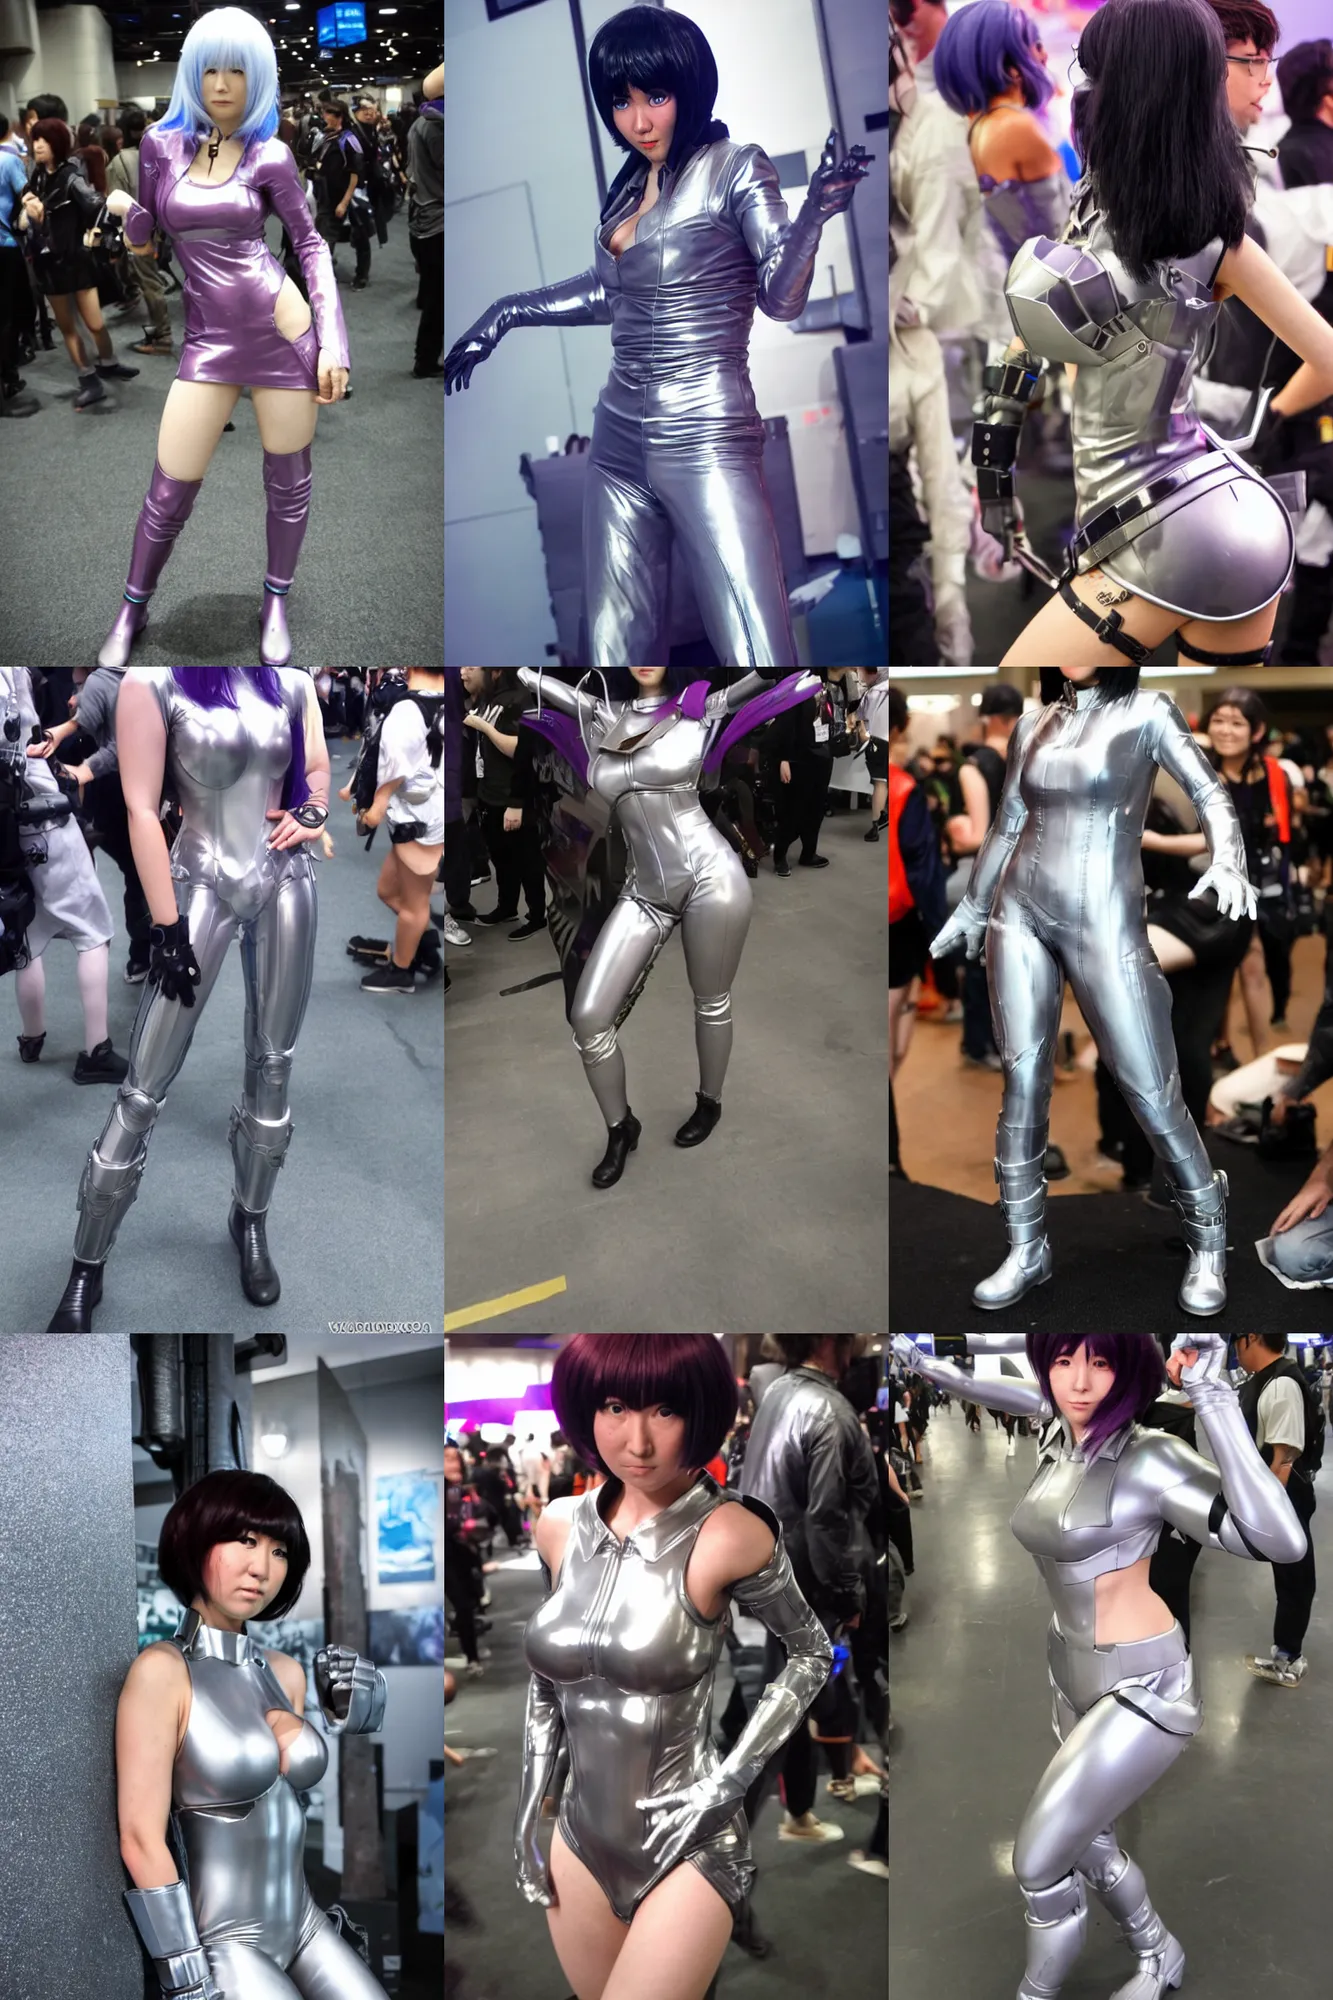 Prompt: beautiful cosplayer dressed as motoko kusangi, photo taken at e 3 conference, tight silver latex, posing for the camera, stretching up, energetic atmosphere